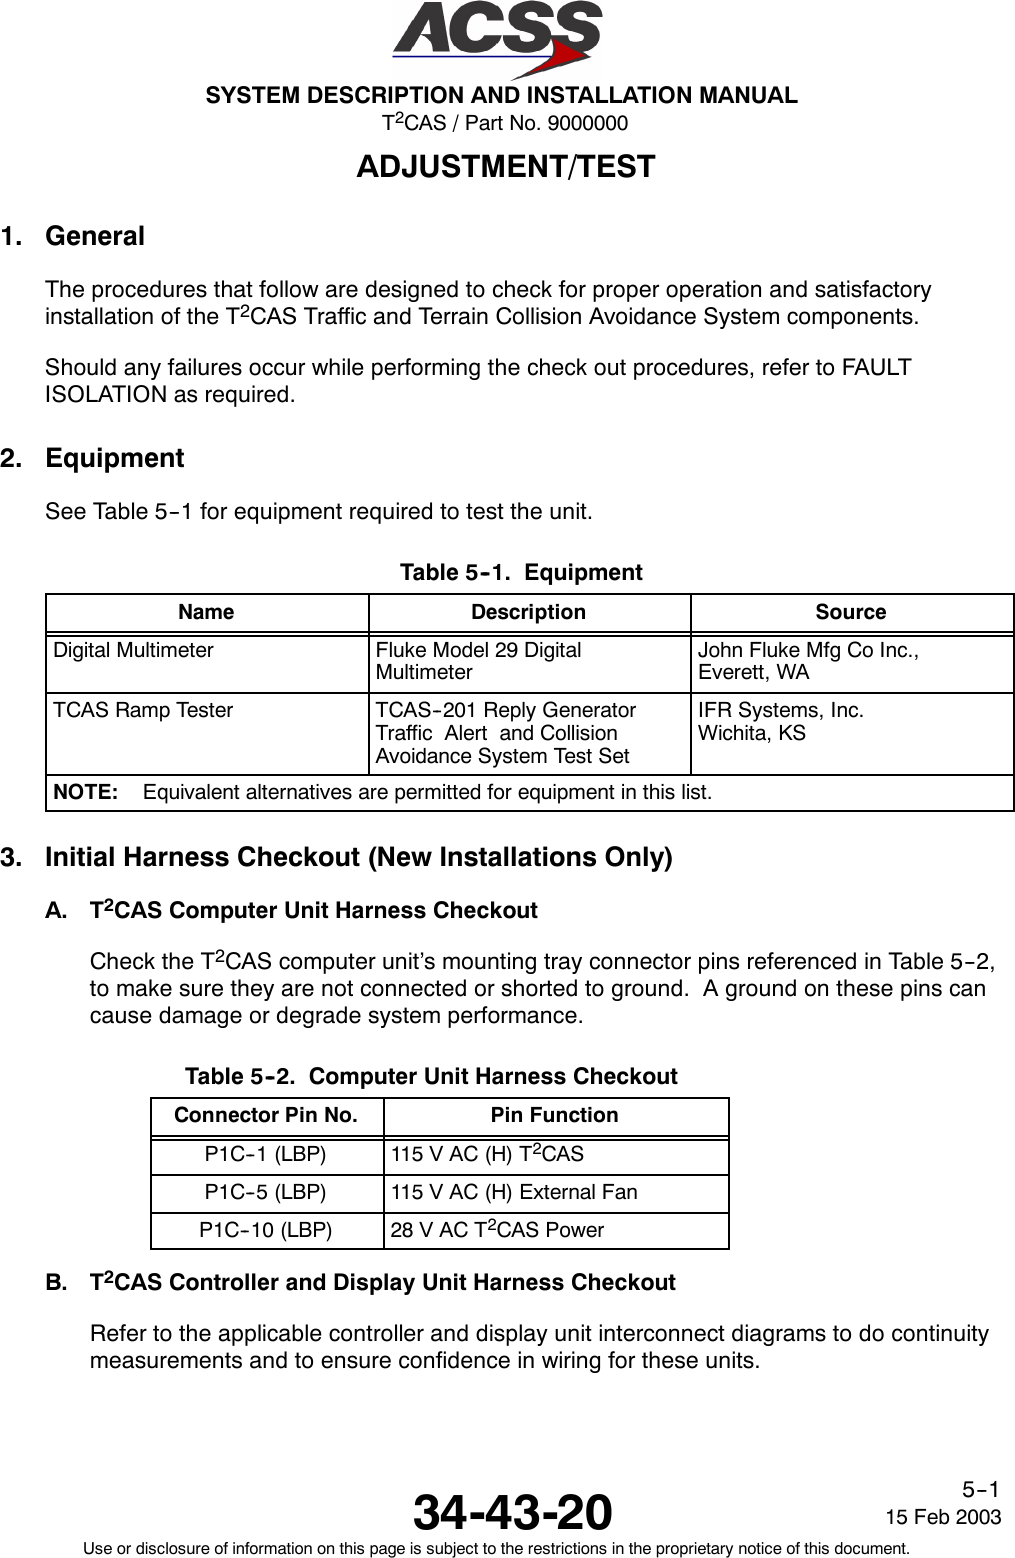 T2CAS / Part No. 9000000SYSTEM DESCRIPTION AND INSTALLATION MANUAL34-43-20 15 Feb 2003Use or disclosure of information on this page is subject to the restrictions in the proprietary notice of this document.5--1ADJUSTMENT/TEST1. GeneralThe procedures that follow are designed to check for proper operation and satisfactoryinstallation of the T2CAS Traffic and Terrain Collision Avoidance System components.Should any failures occur while performing the check out procedures, refer to FAULTISOLATION as required.2. EquipmentSee Table 5--1 for equipment required to test the unit.Table 5--1. EquipmentName Description SourceDigital Multimeter Fluke Model 29 DigitalMultimeterJohn Fluke Mfg Co Inc.,Everett, WATCAS Ramp Tester TCAS--201 Reply GeneratorTraffic Alert and CollisionAvoidance System Test SetIFR Systems, Inc.Wichita, KSNOTE: Equivalent alternatives are permitted for equipment in this list.3. Initial Harness Checkout (New Installations Only)A. T2CAS Computer Unit Harness CheckoutCheck the T2CAS computer unit’s mounting tray connector pins referenced in Table 5--2,to make sure they are not connected or shorted to ground. A ground on these pins cancause damage or degrade system performance.Table 5--2. Computer Unit Harness CheckoutConnector Pin No. Pin FunctionP1C--1 (LBP) 115 V AC (H) T2CASP1C--5 (LBP) 115 V AC (H) External FanP1C--10 (LBP) 28 V AC T2CAS PowerB. T2CAS Controller and Display Unit Harness CheckoutRefer to the applicable controller and display unit interconnect diagrams to do continuitymeasurements and to ensure confidence in wiring for these units.